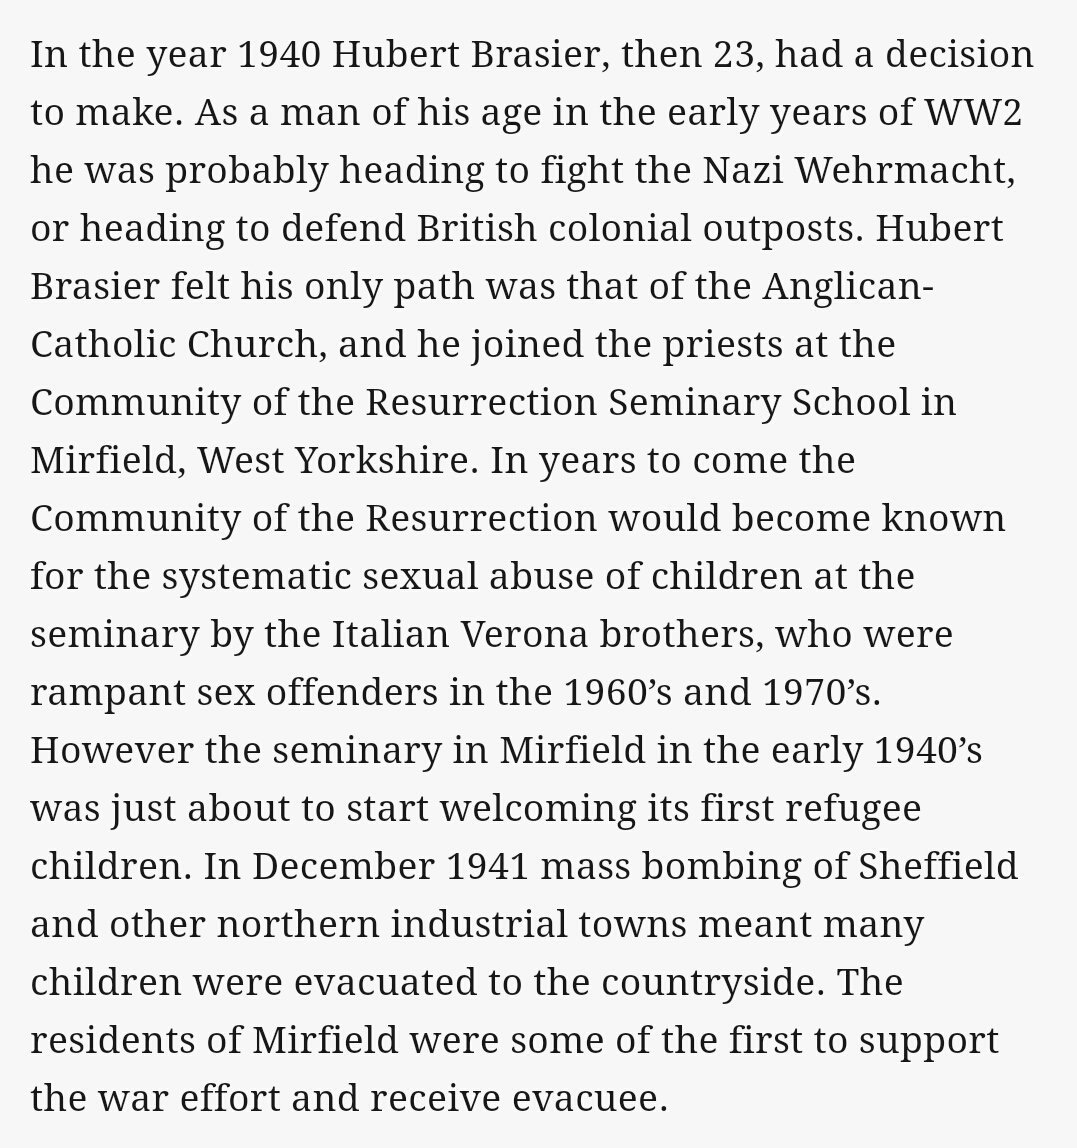 5 ce again Theresa s father is closely associated with another institution involved in child abuse